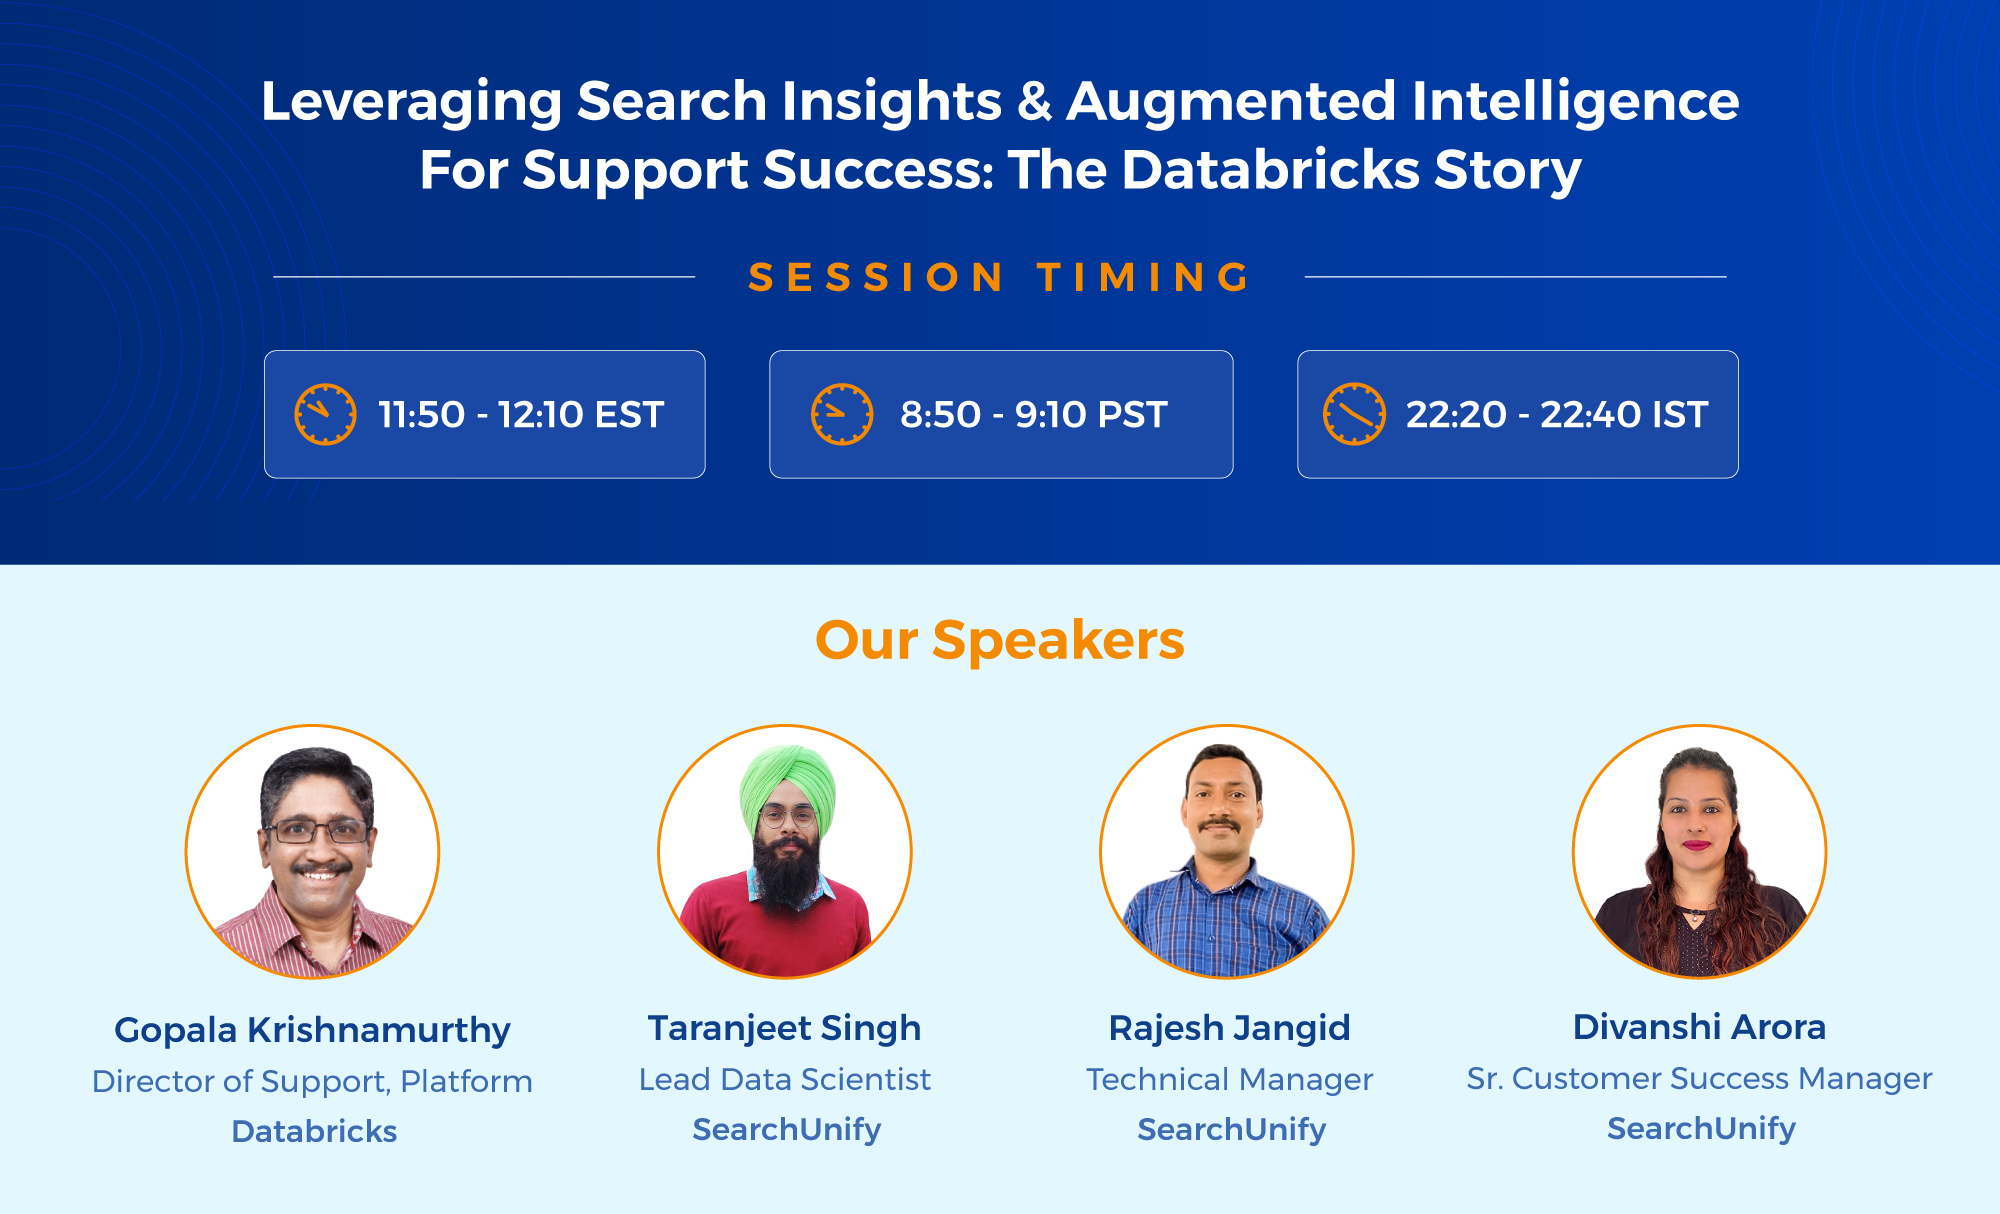 Leveraging Search Insights & Augmented Intelligence for Support Success: The Databricks Story